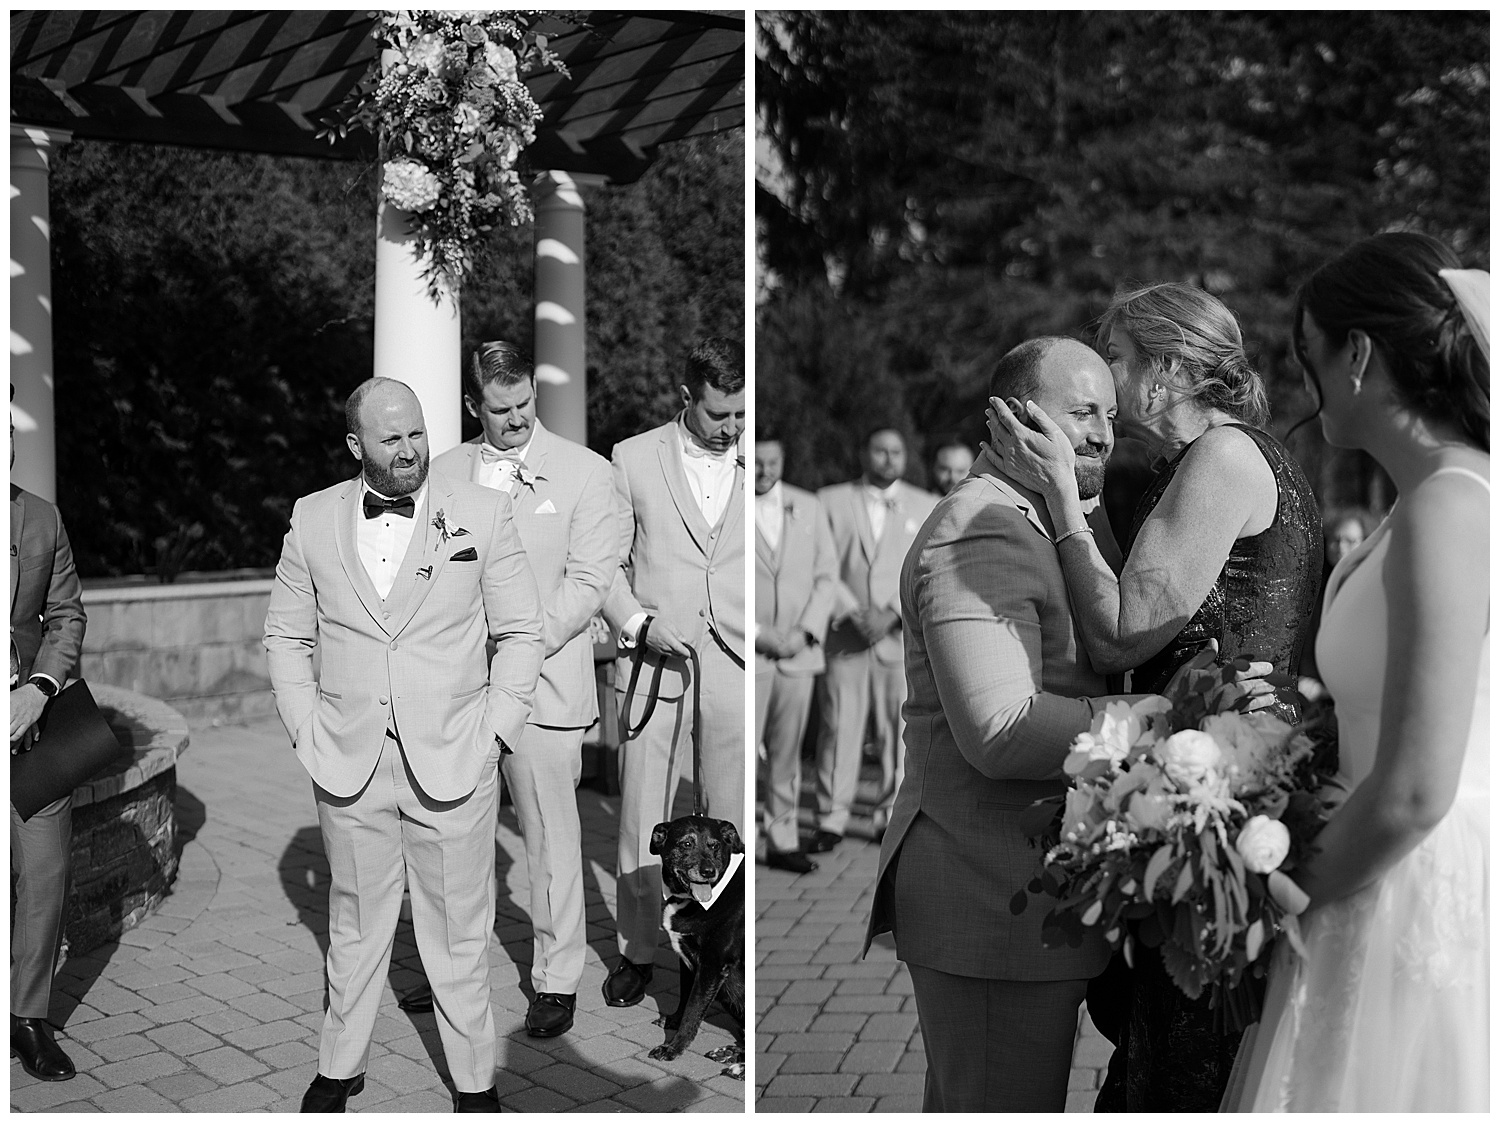 Candid Black and White Photos from Wedding Ceremony